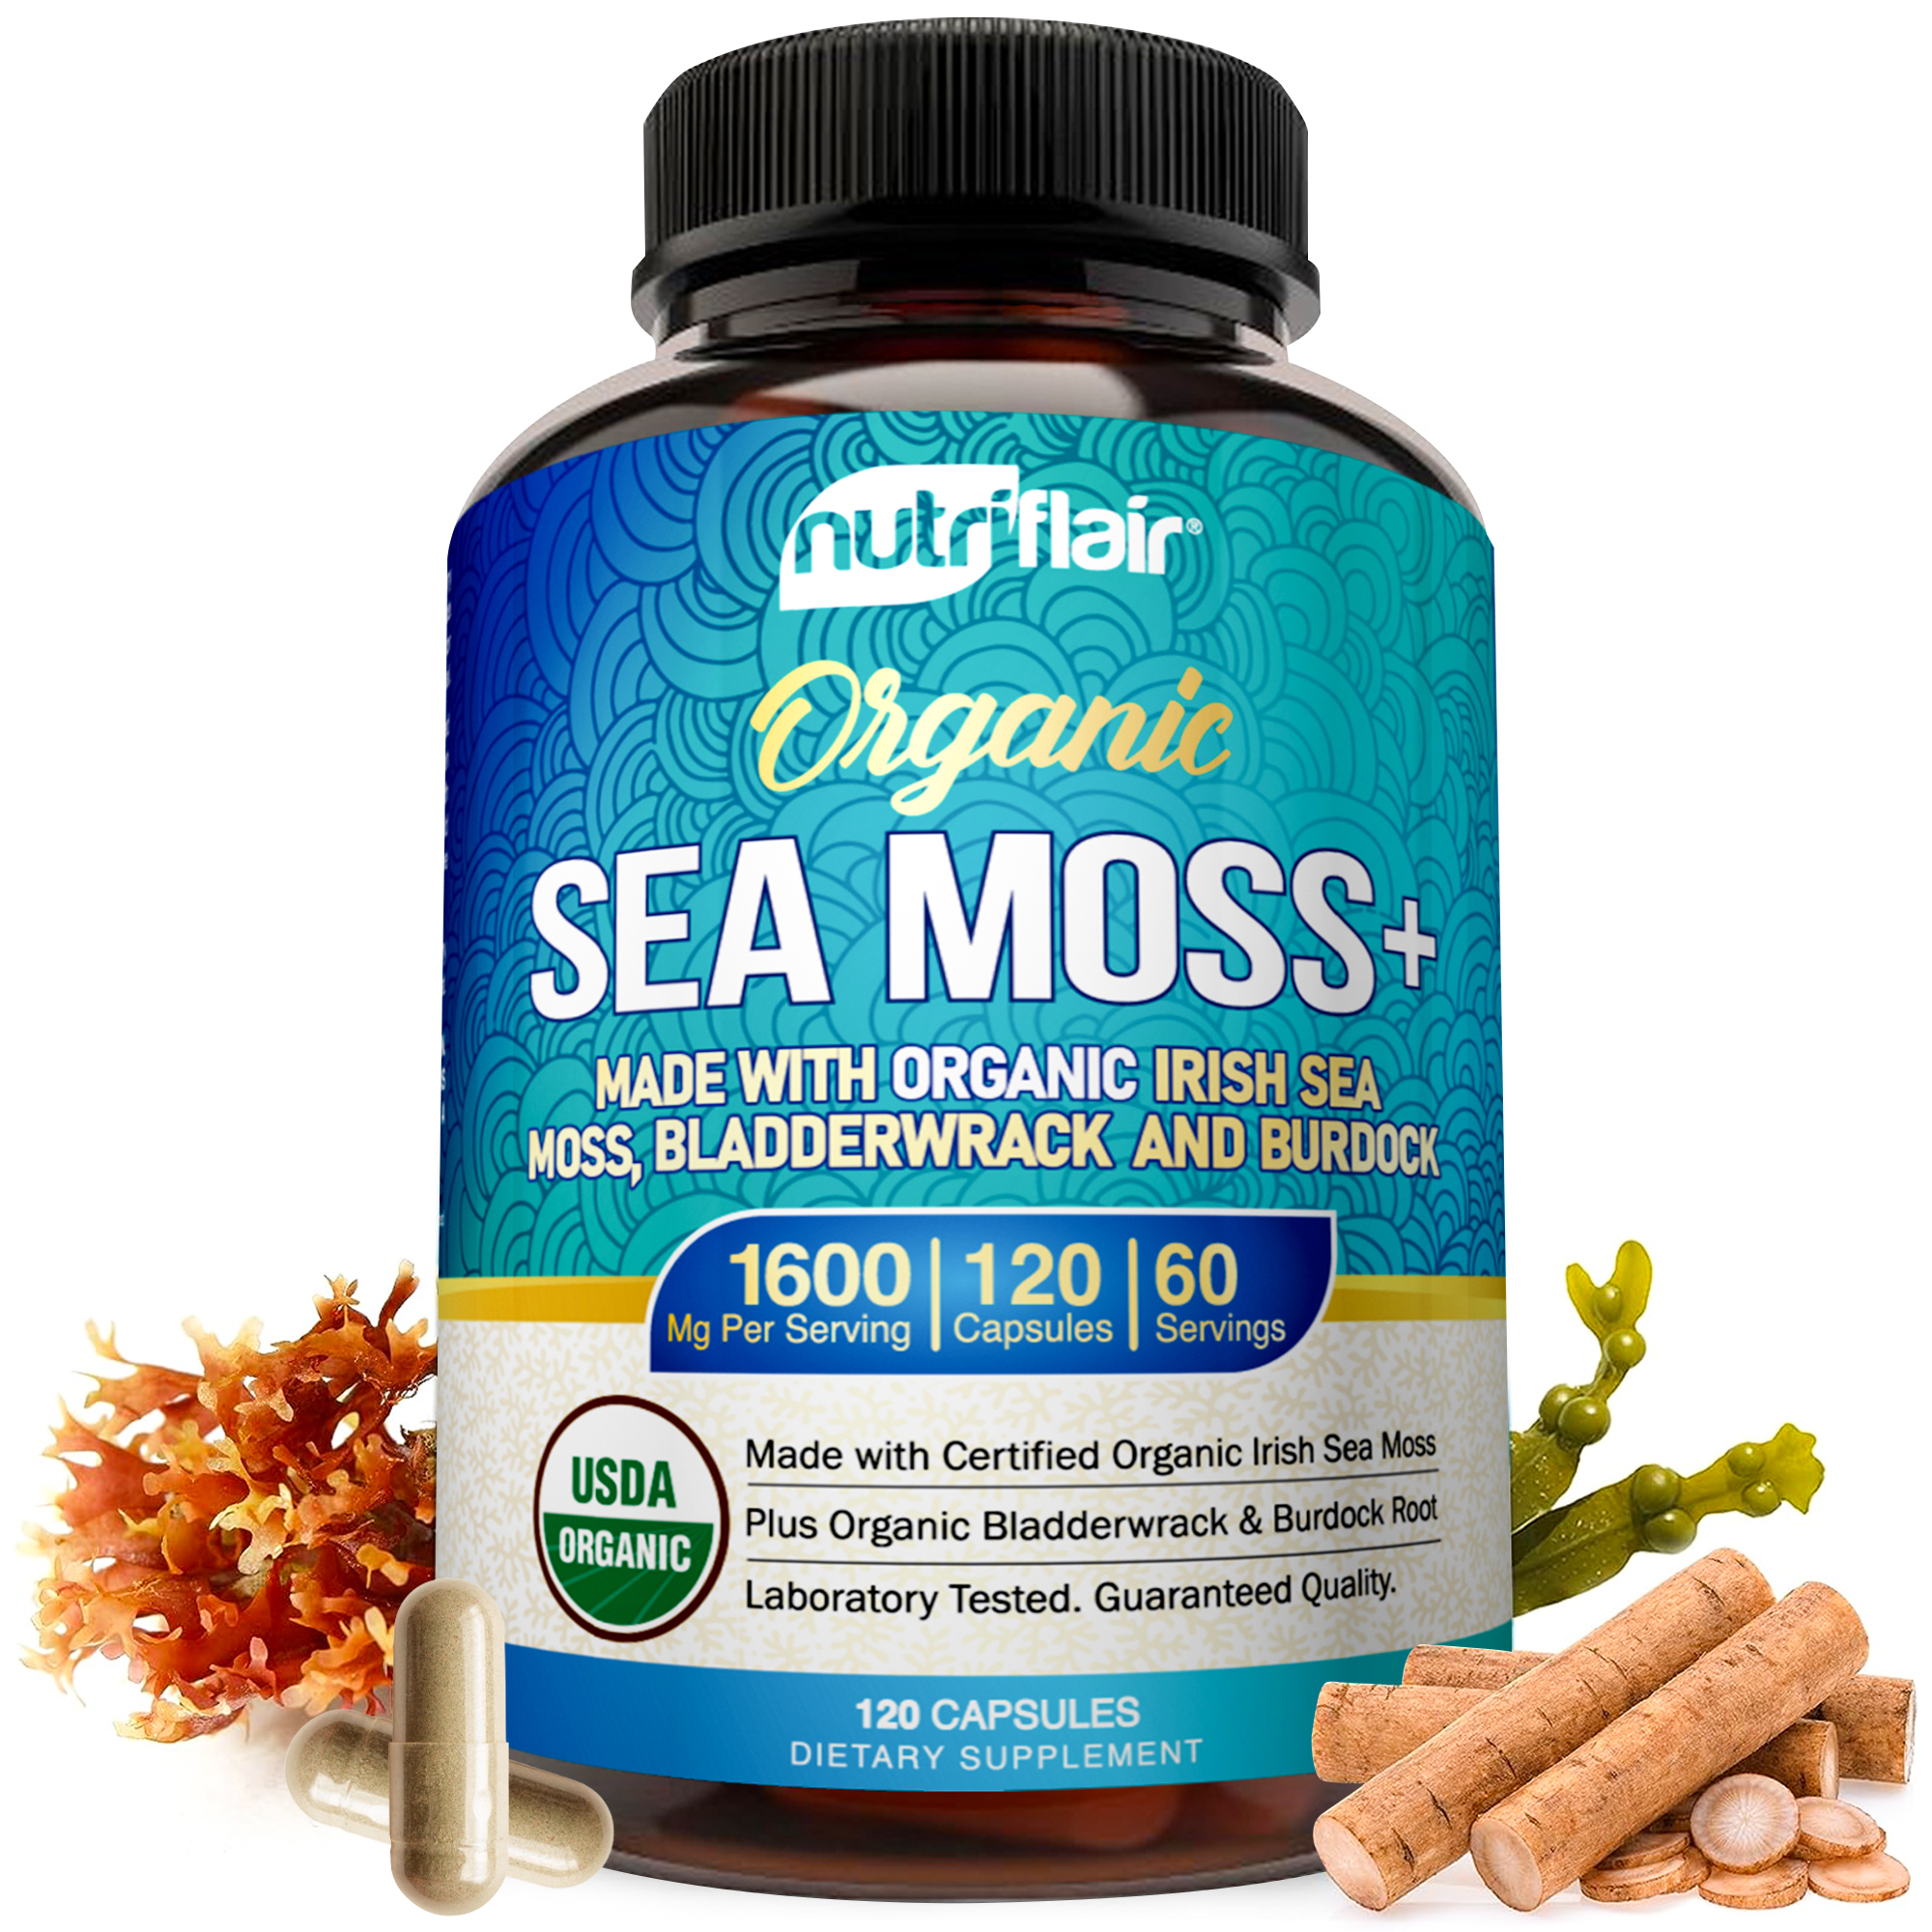 NutriFlair USDA Certified Organic Sea Moss Capsules 1600mg, 120 Capsules - Immunity, Gut, Energy - Superfood Sea Moss Supplements with Raw Sea Moss Powder for Women and Men - image 1 of 8